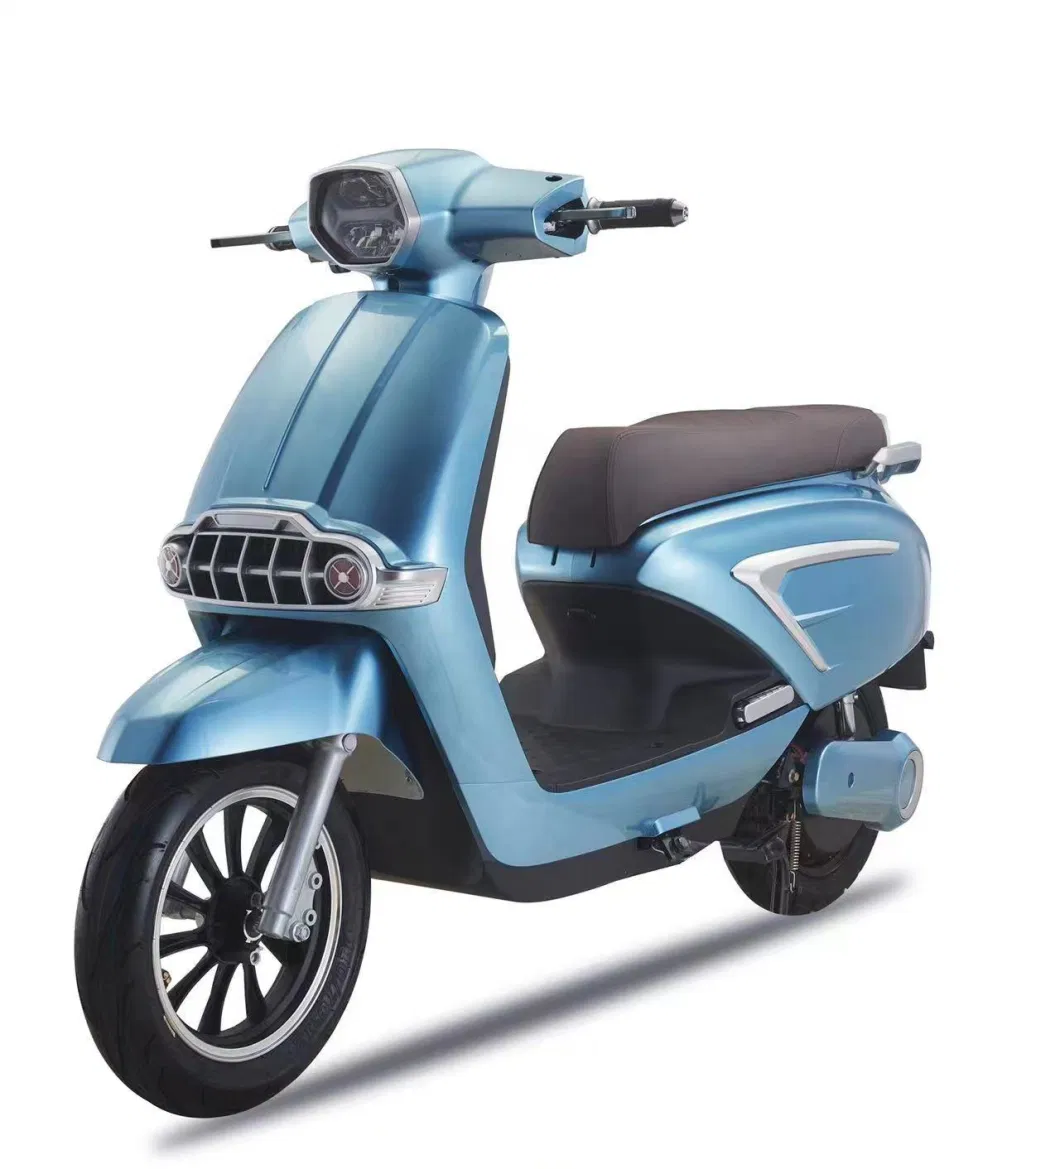 2000W4000W EEC China Classic Electric Motorcycle Vespa CKD Electric Scooter 2-Wheeler with Removable Lithium Battery 80km/H